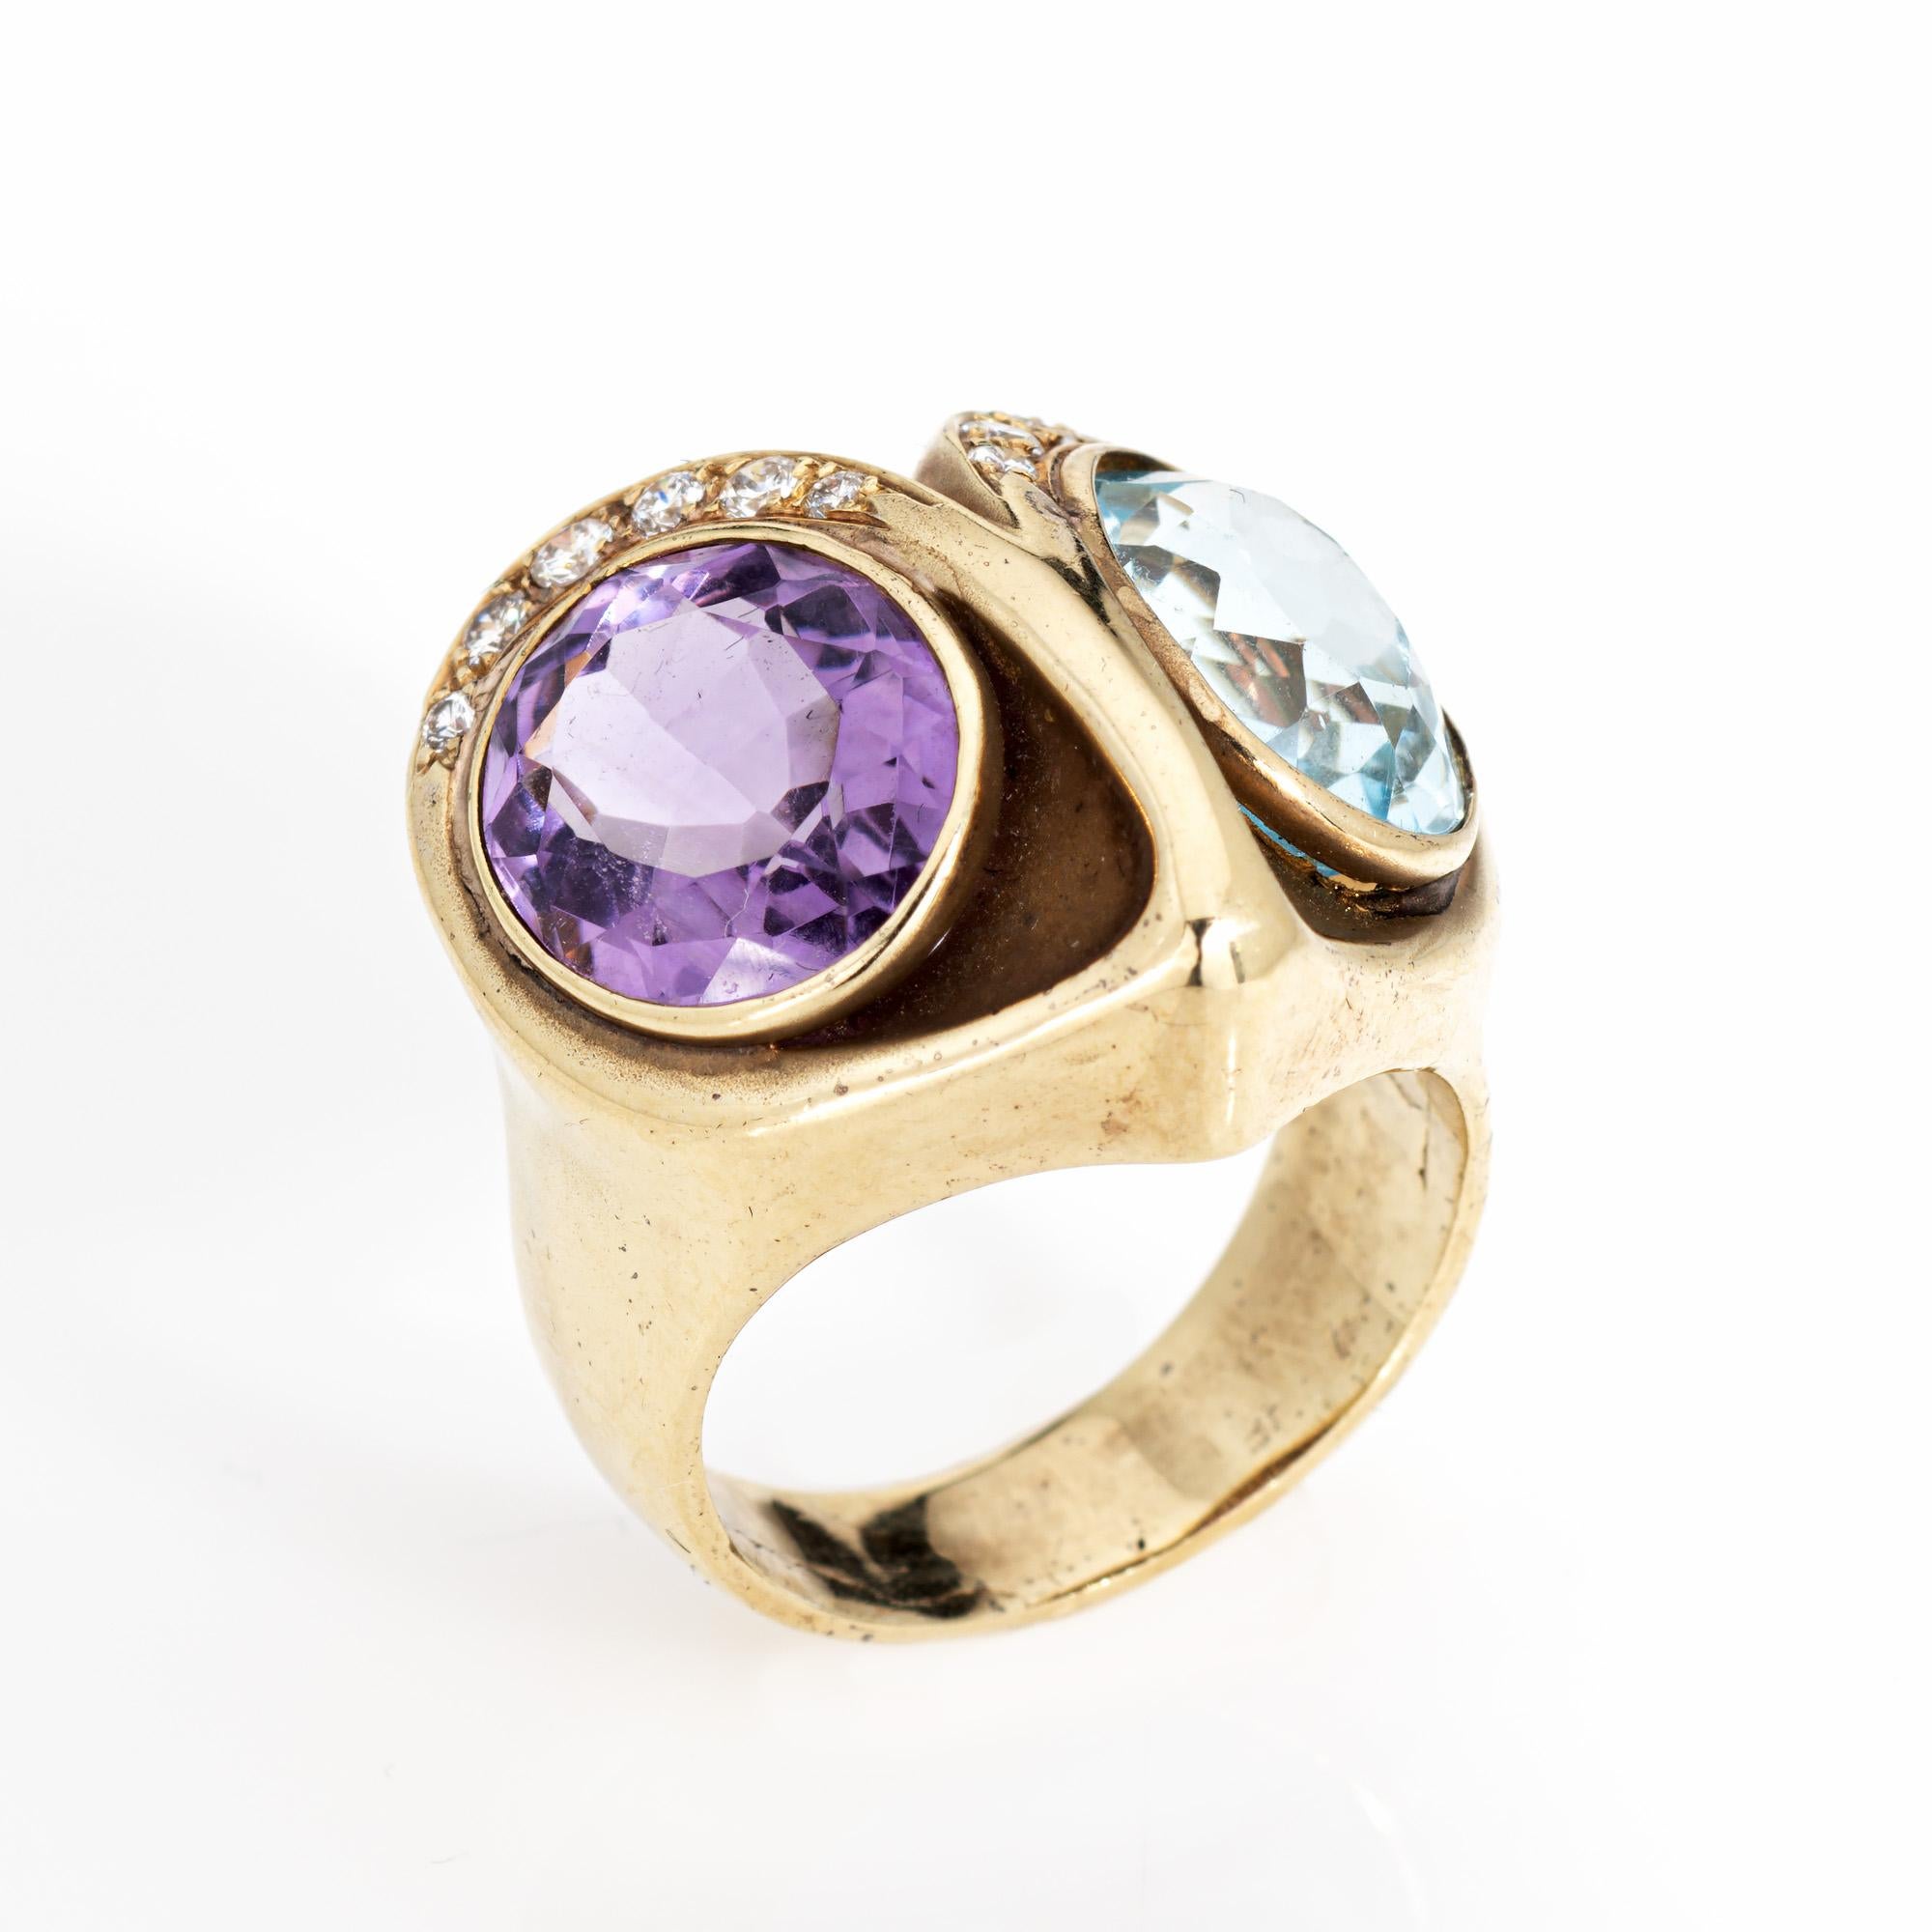 Distinct stylized owl ring set with amethyst and blue topaz, crafted in 14 karat yellow gold (circa 1970s to 1980s). 

Blue topaz and amethyst measures 12mm x 9mm. 12 diamonds total an estimated 0.08 carats (estimated at H-I color and SI1-2